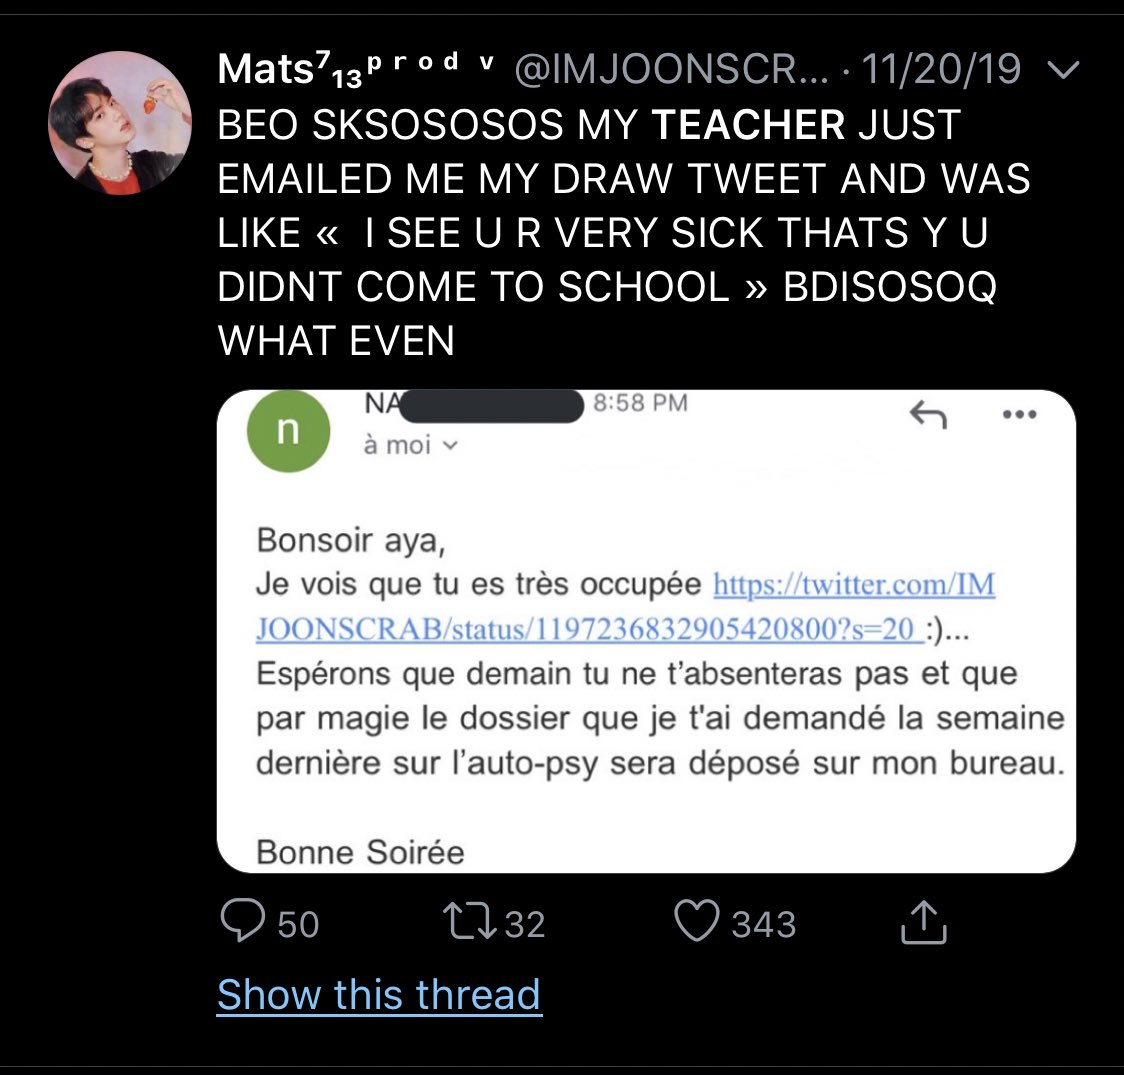 She has posted about this same teacher multiple times, and these are all fake